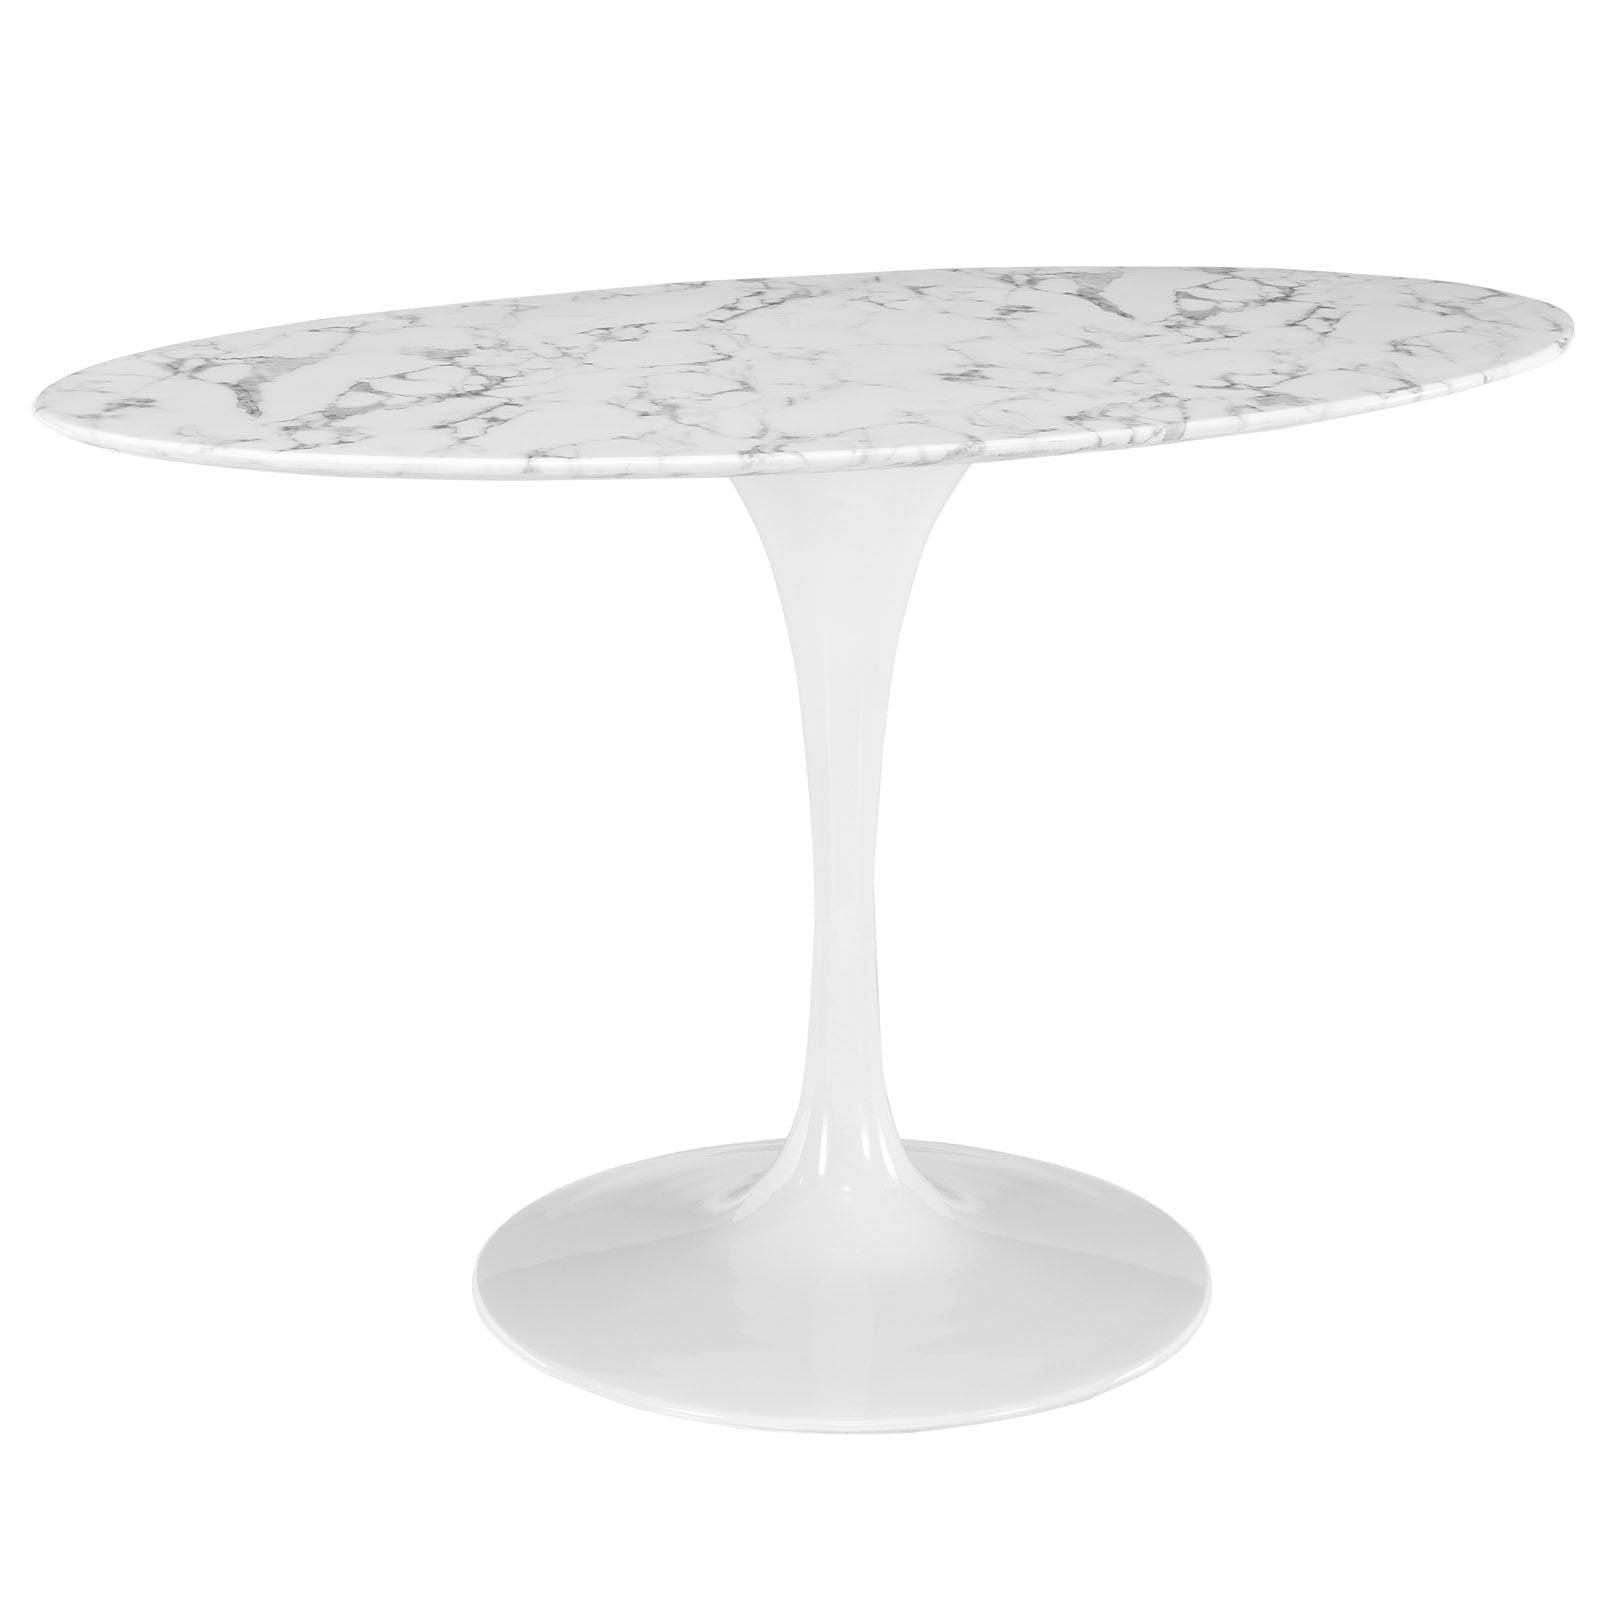 Tulip Style 54" Oval Marble Dining Table - living-essentials